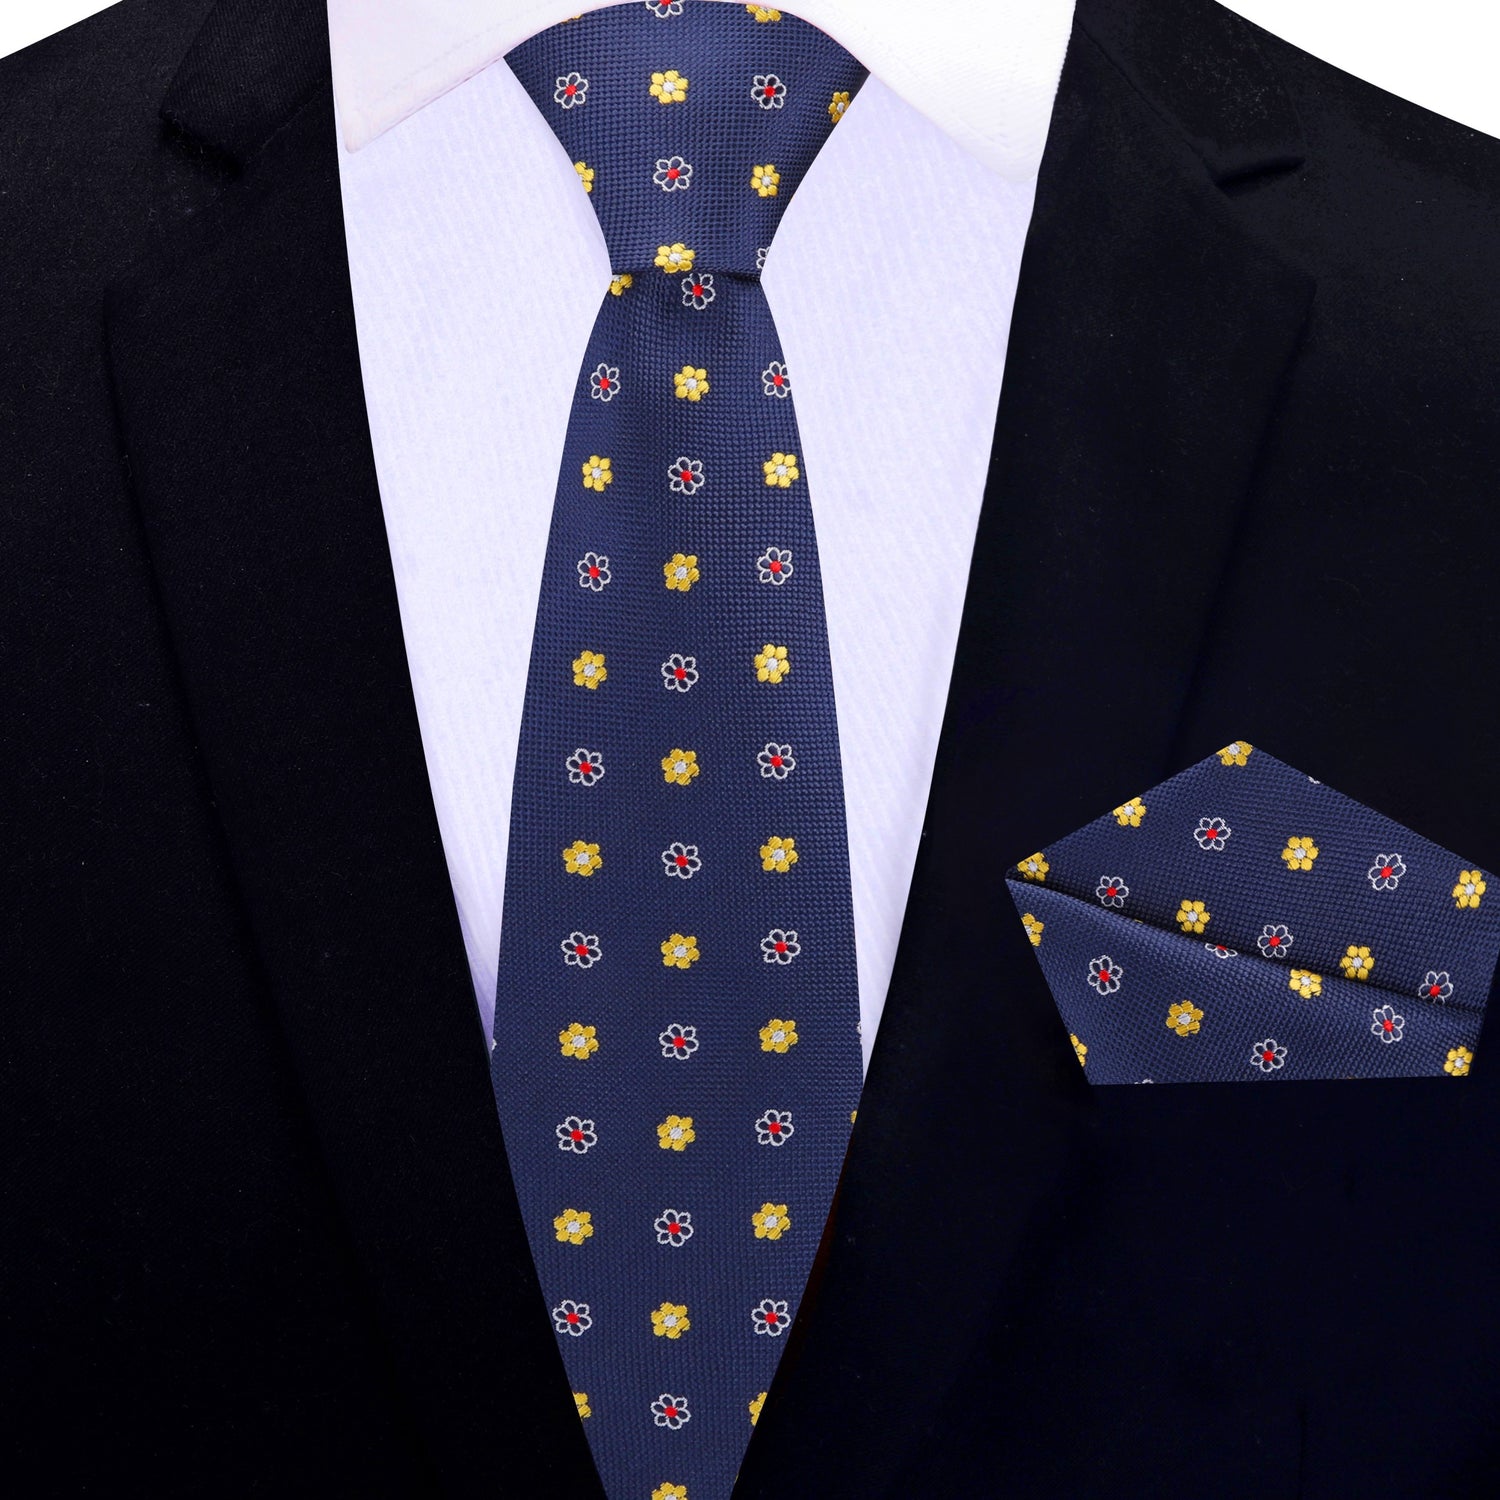 Thin Tie: Blue, Yellow and Red Small Flowers Tie and Blue and Matching Square